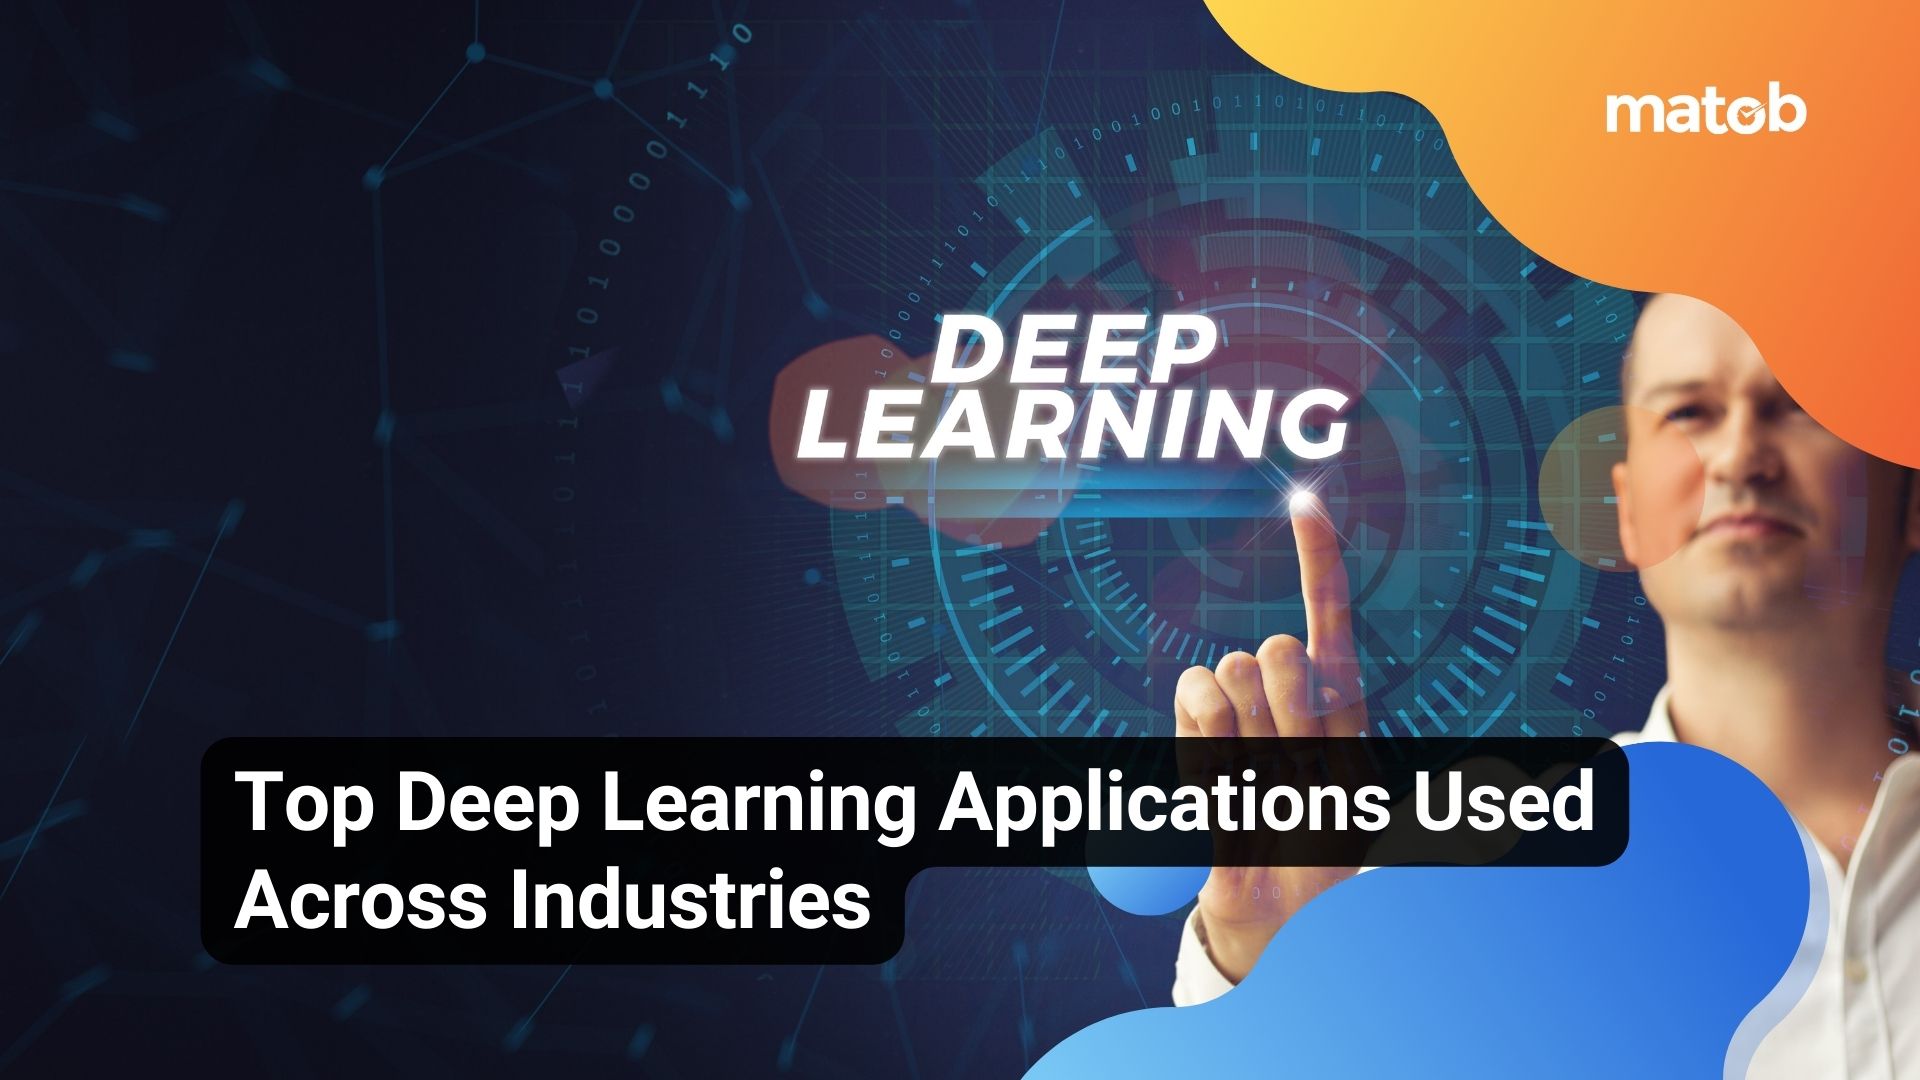 Top Deep Learning Applications Used Across Industries